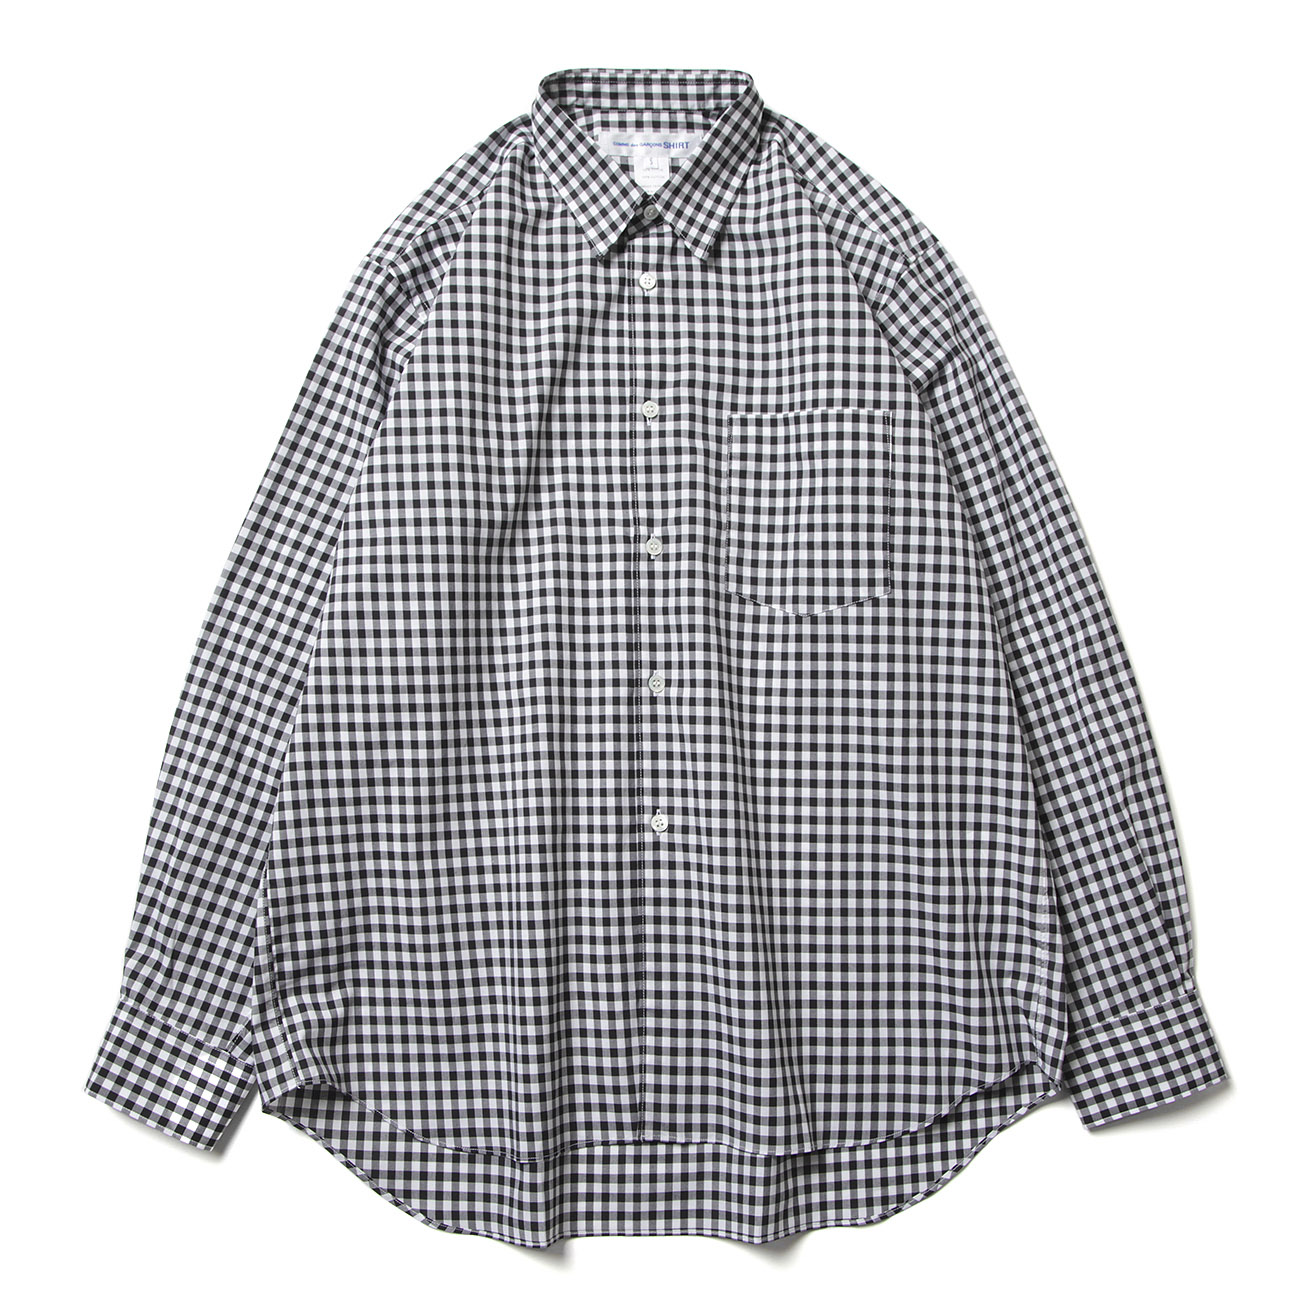 FOREVER / Wide Classic - GINGHAM GROUP shape 1 - Black